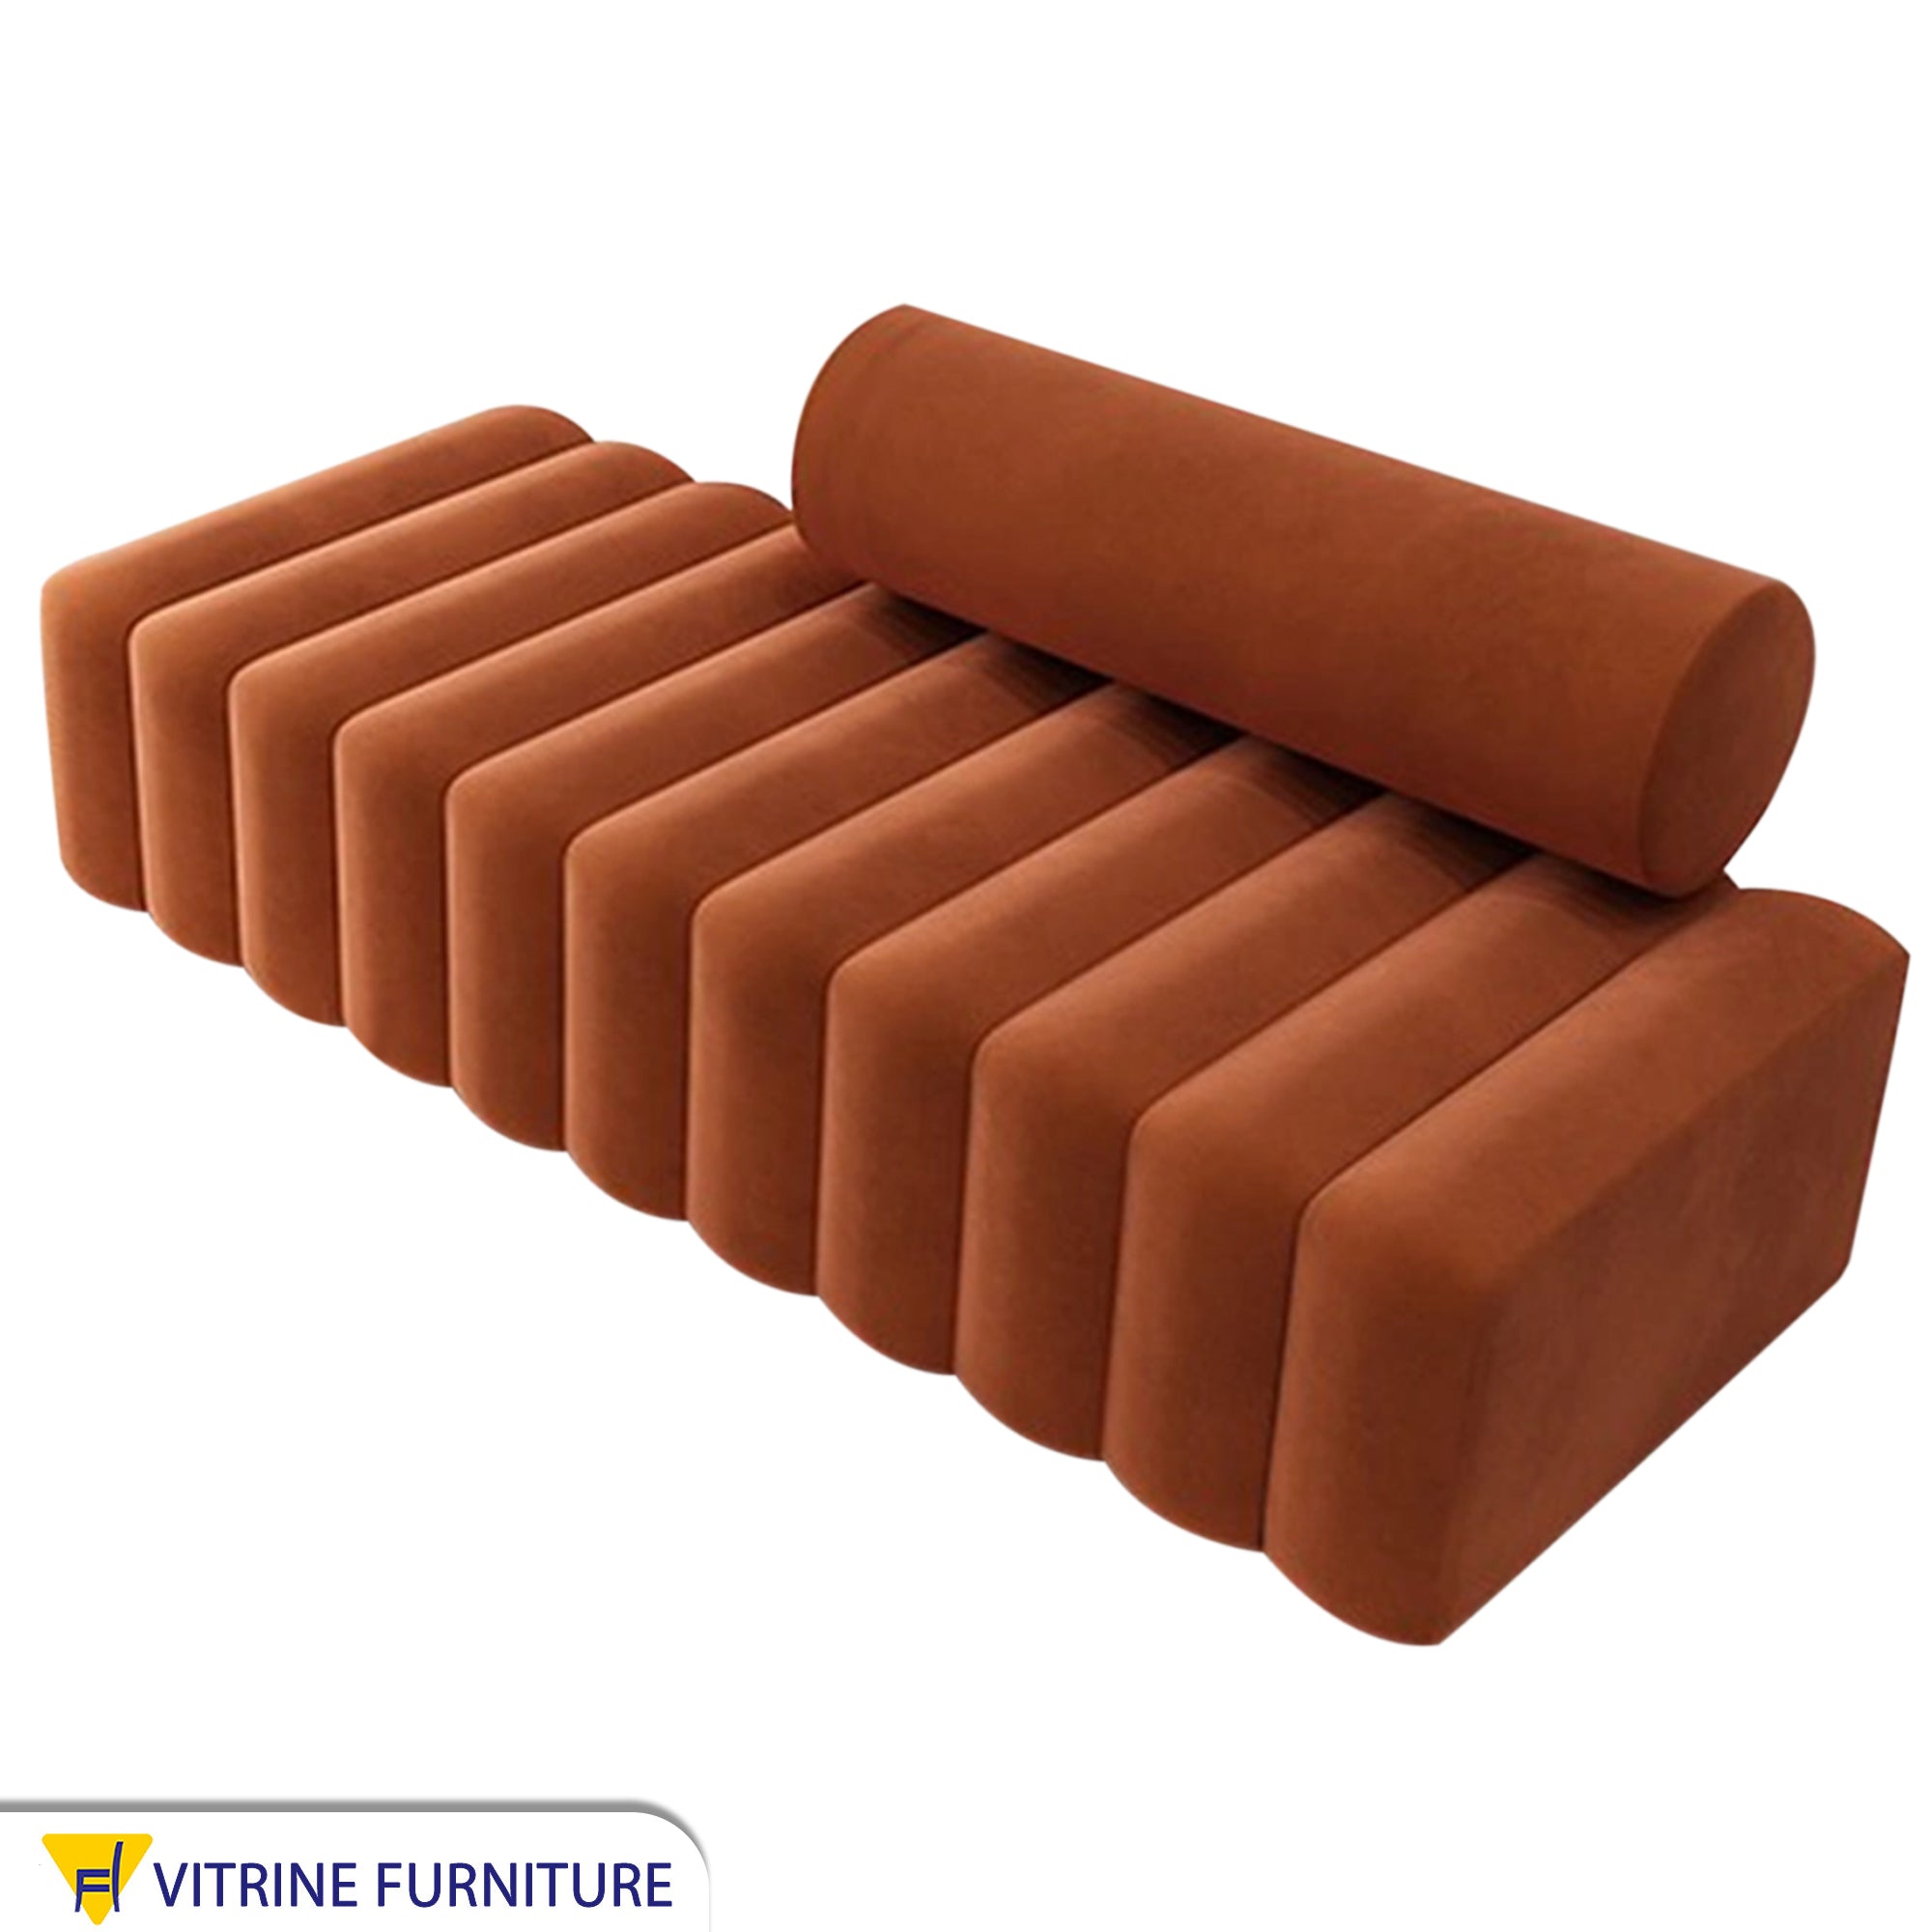 Chaise longue sofa with ribbed upholstery